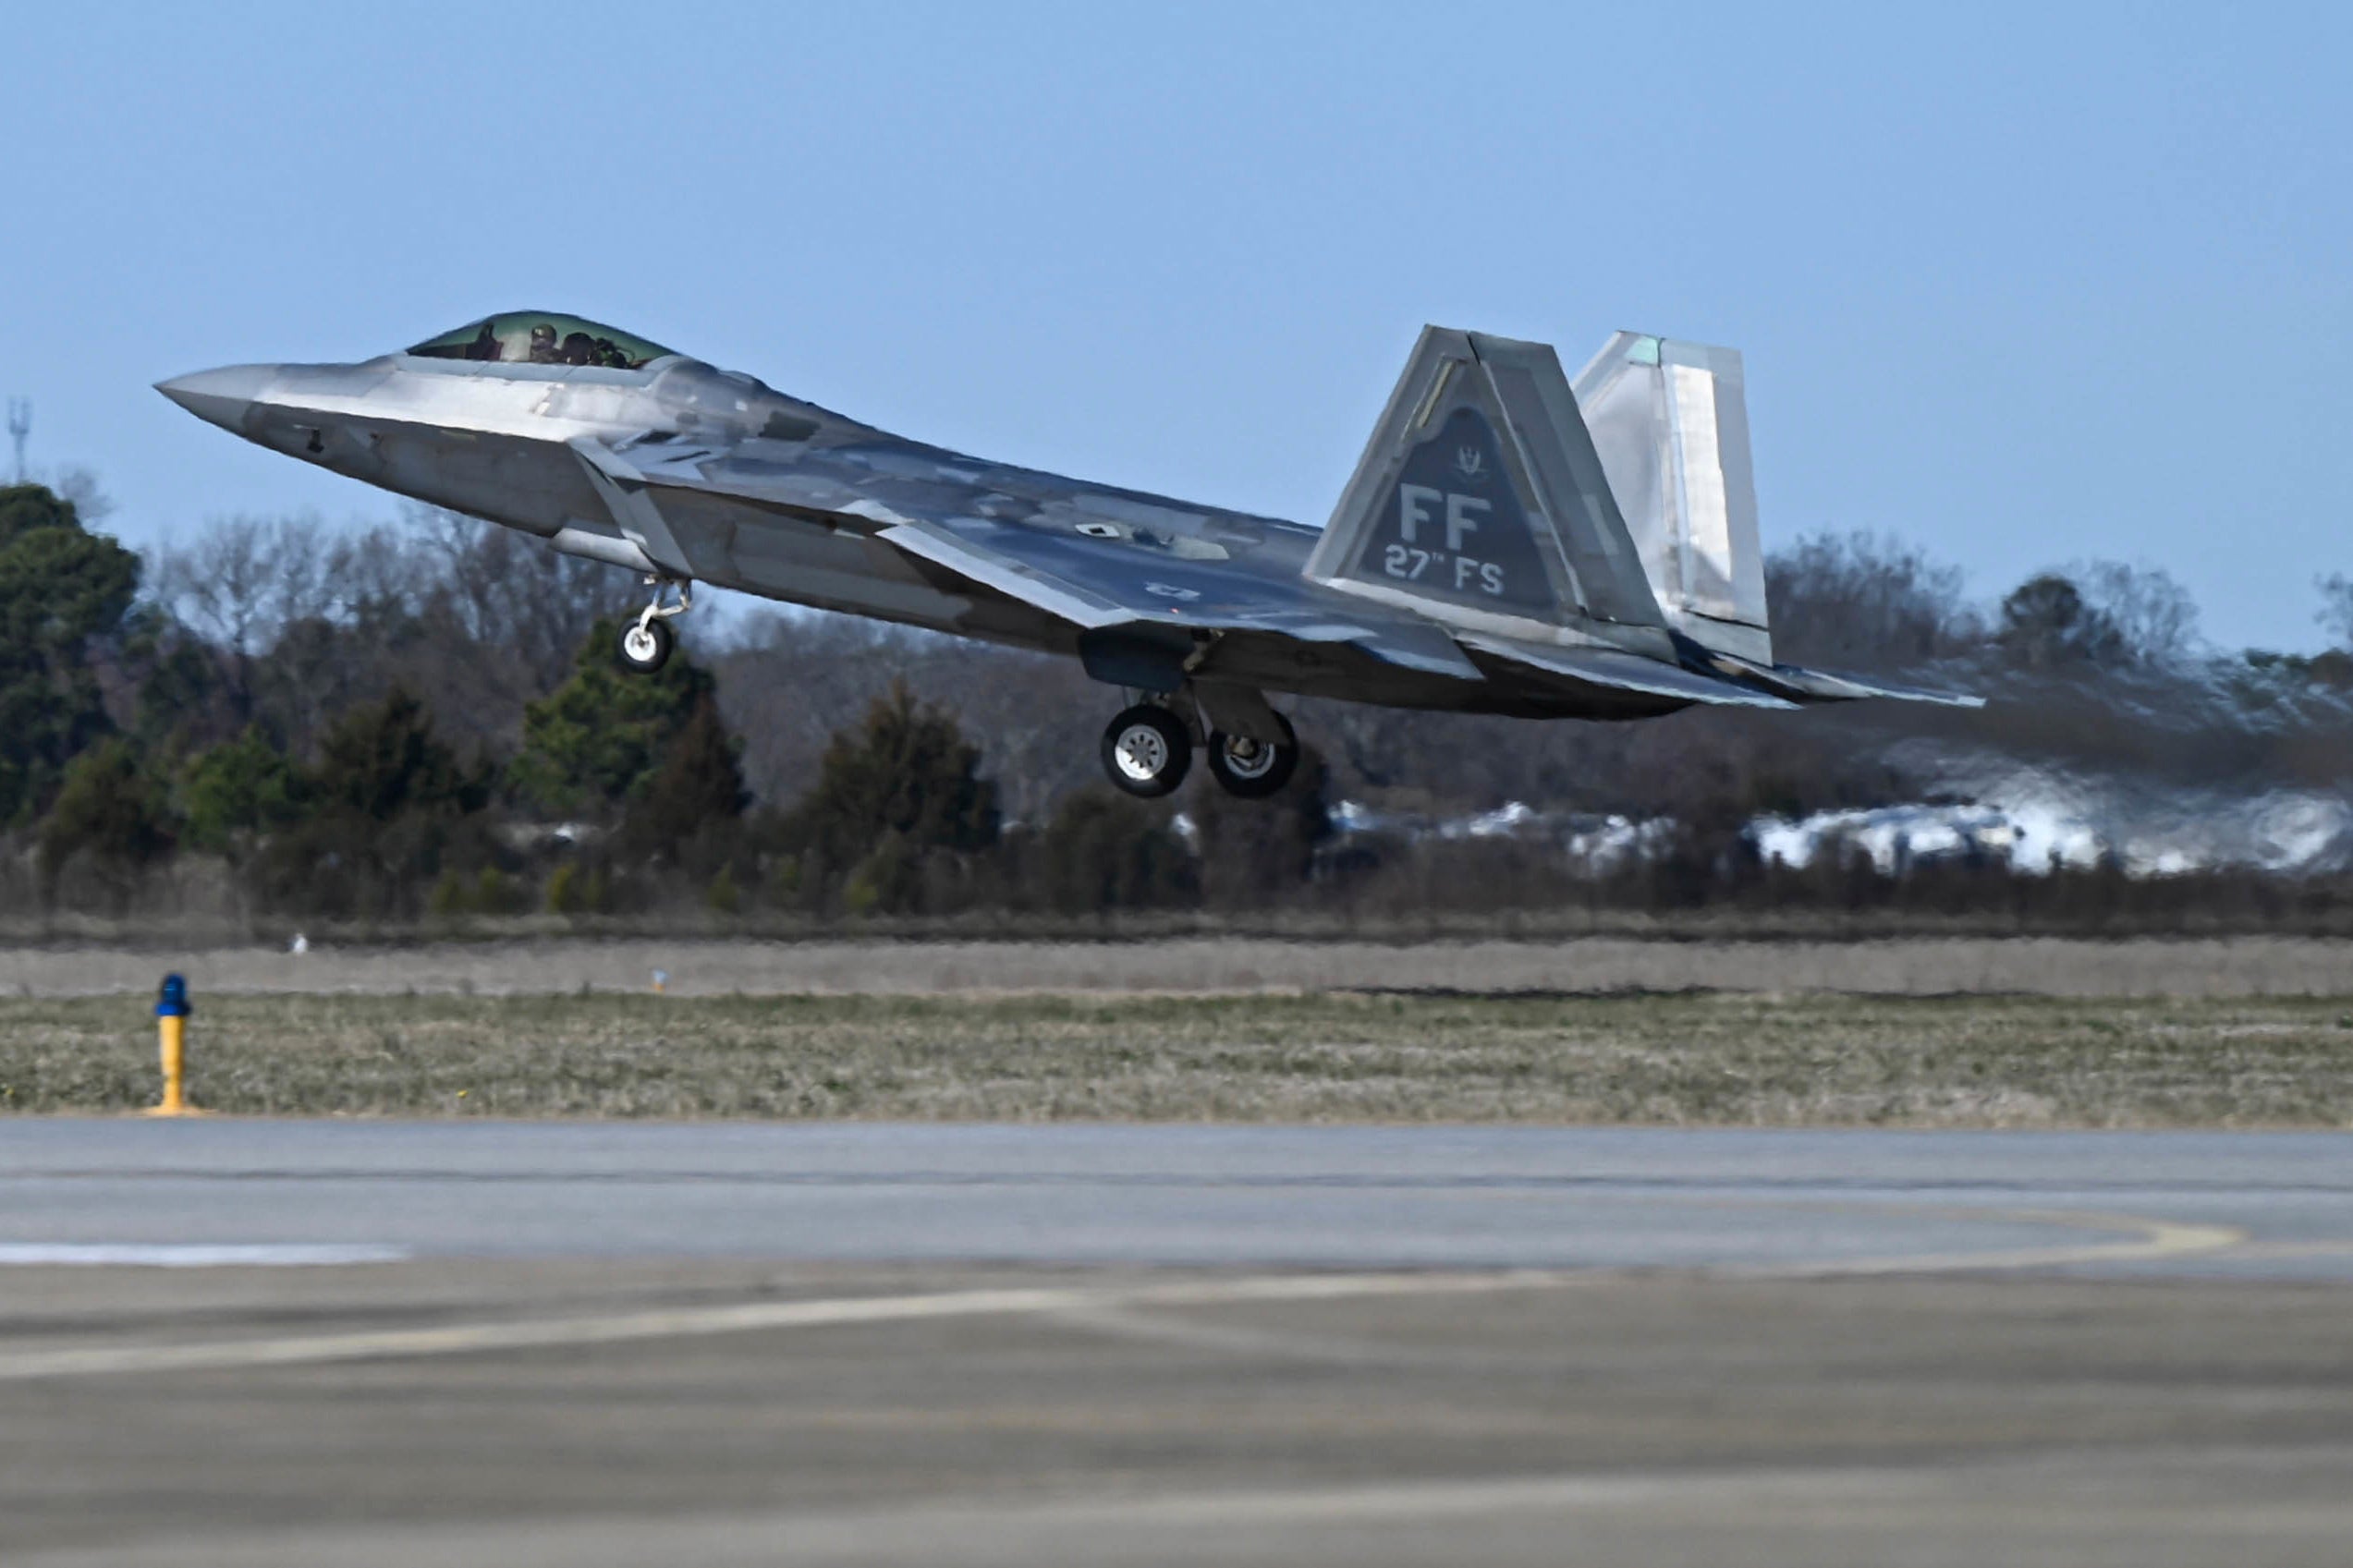 This photo provided by the U.S. Air Force shows a U.S. Air Force pilot taking off in an F-22 Raptor at Joint Base Langley-Eustis on 4 February